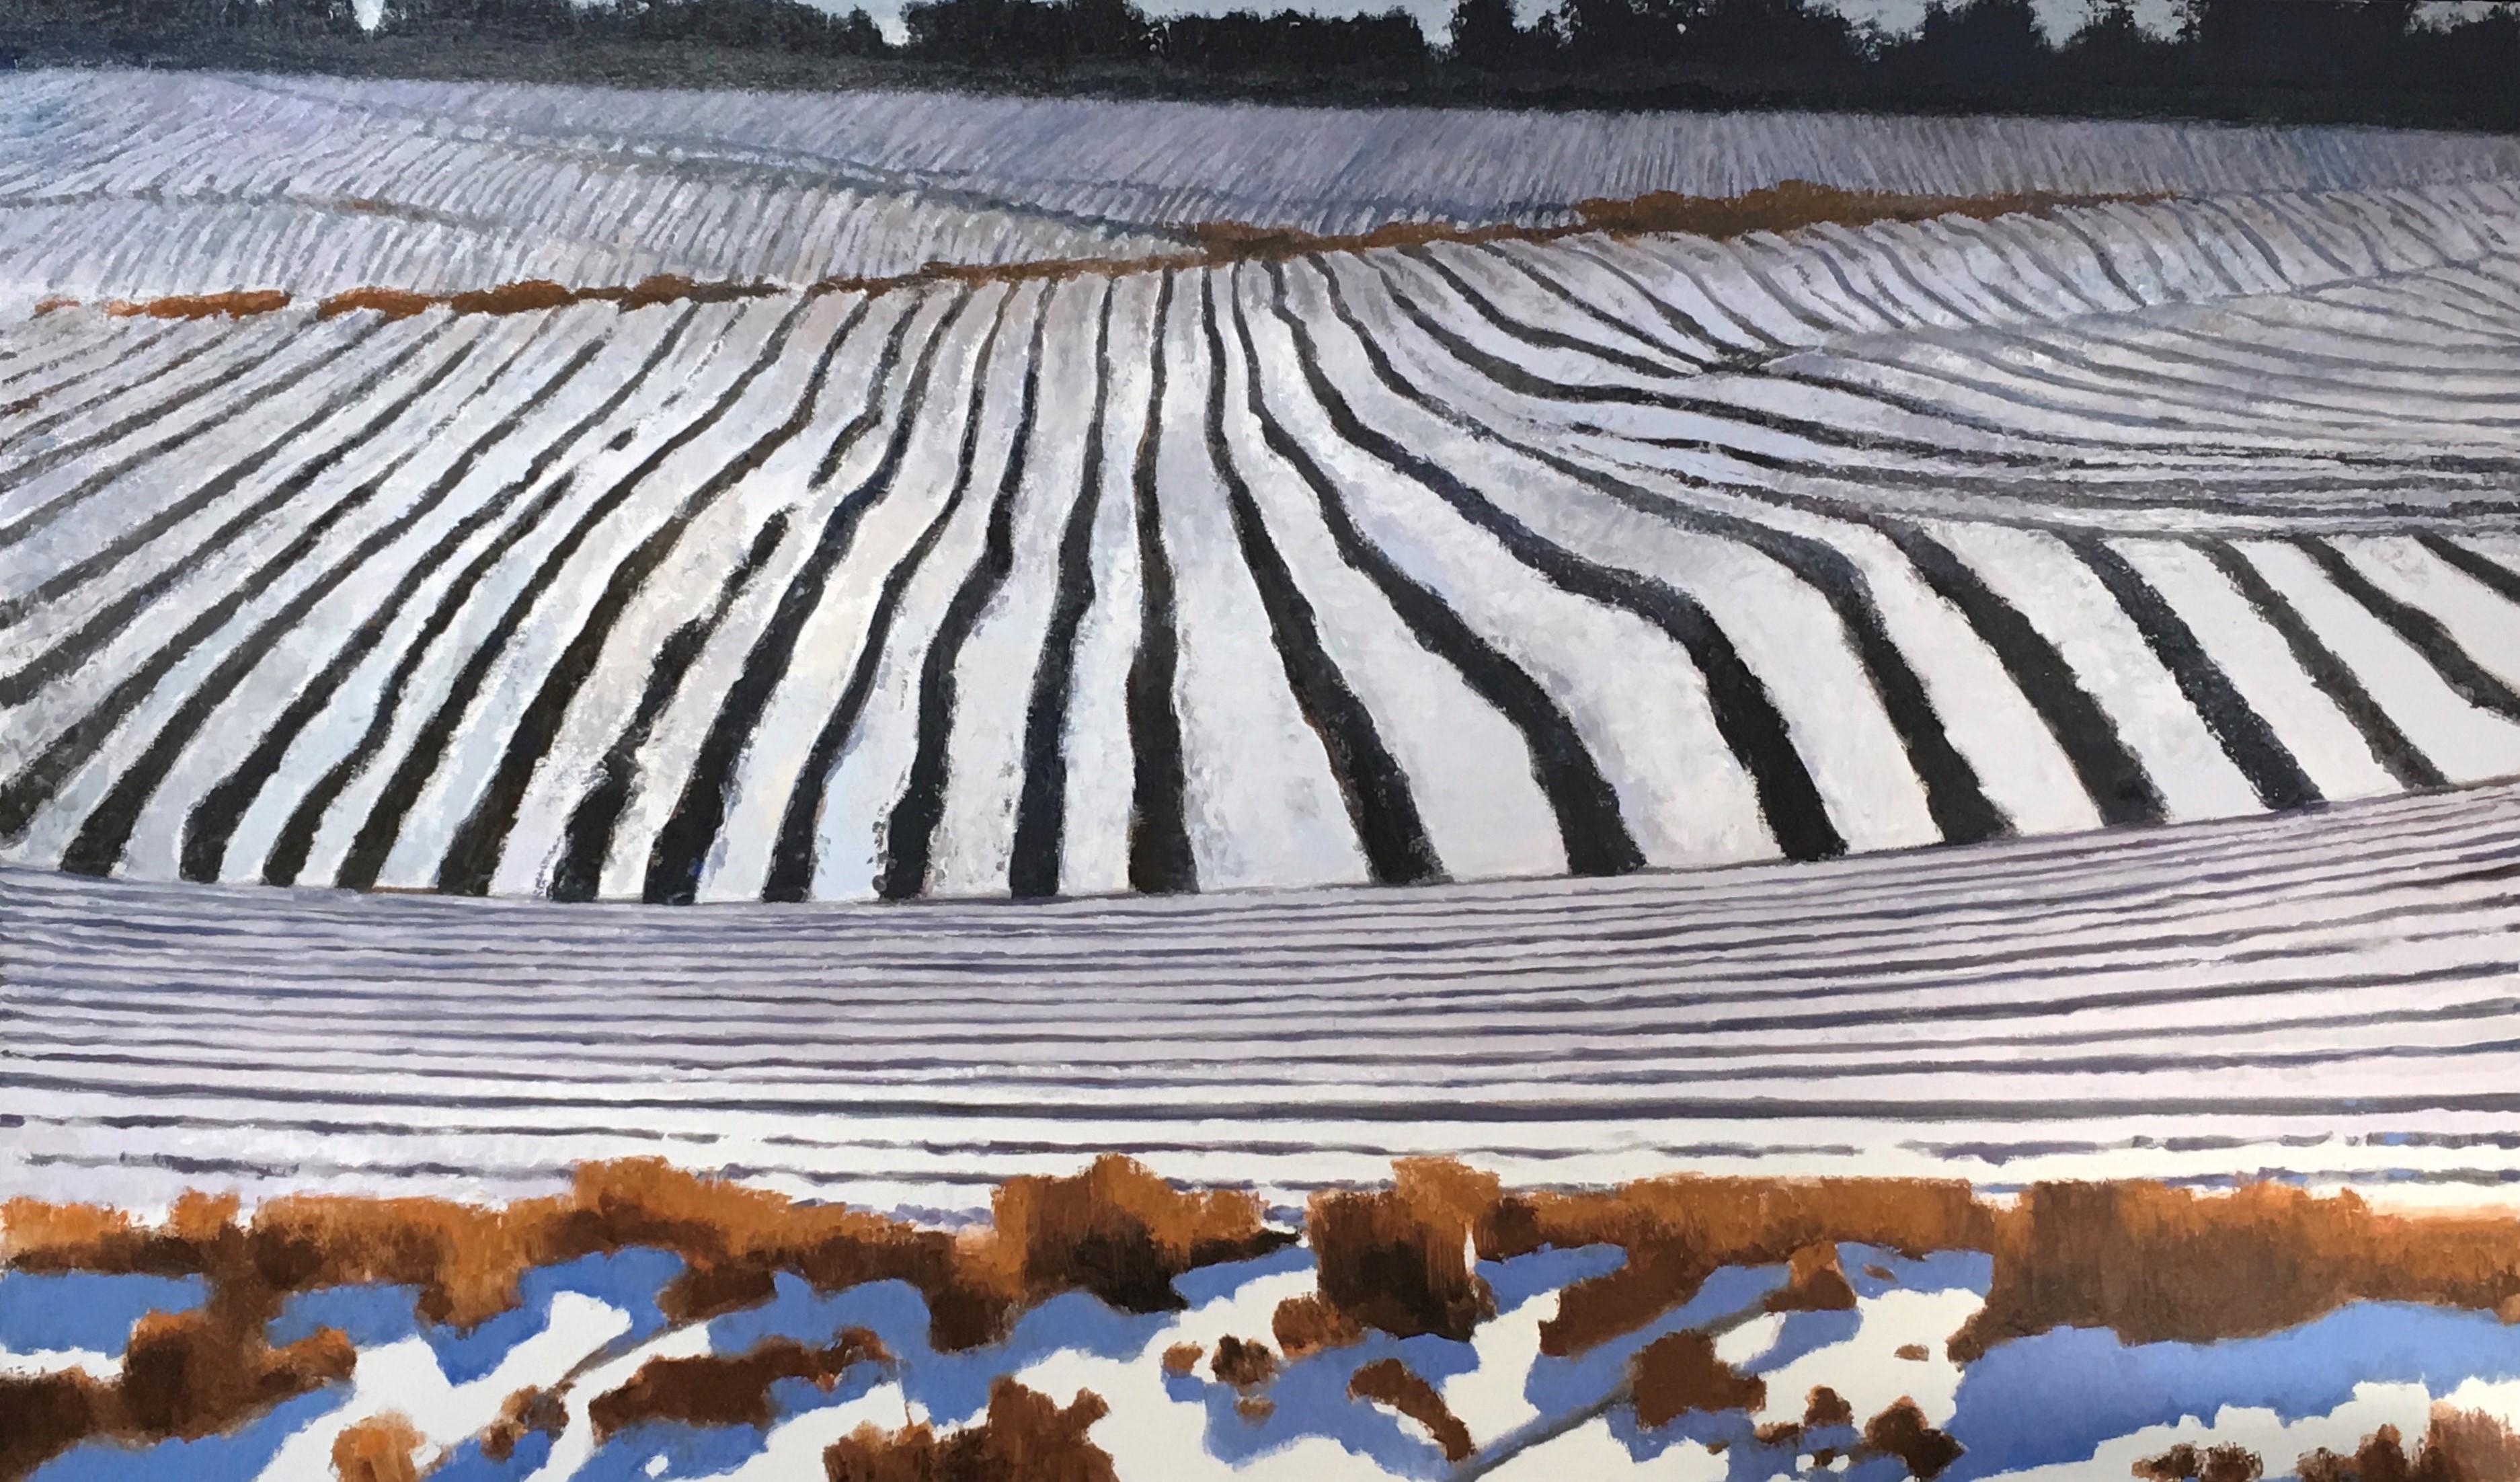 Gary Ernest Smith Landscape Painting - "Winter Patterns"